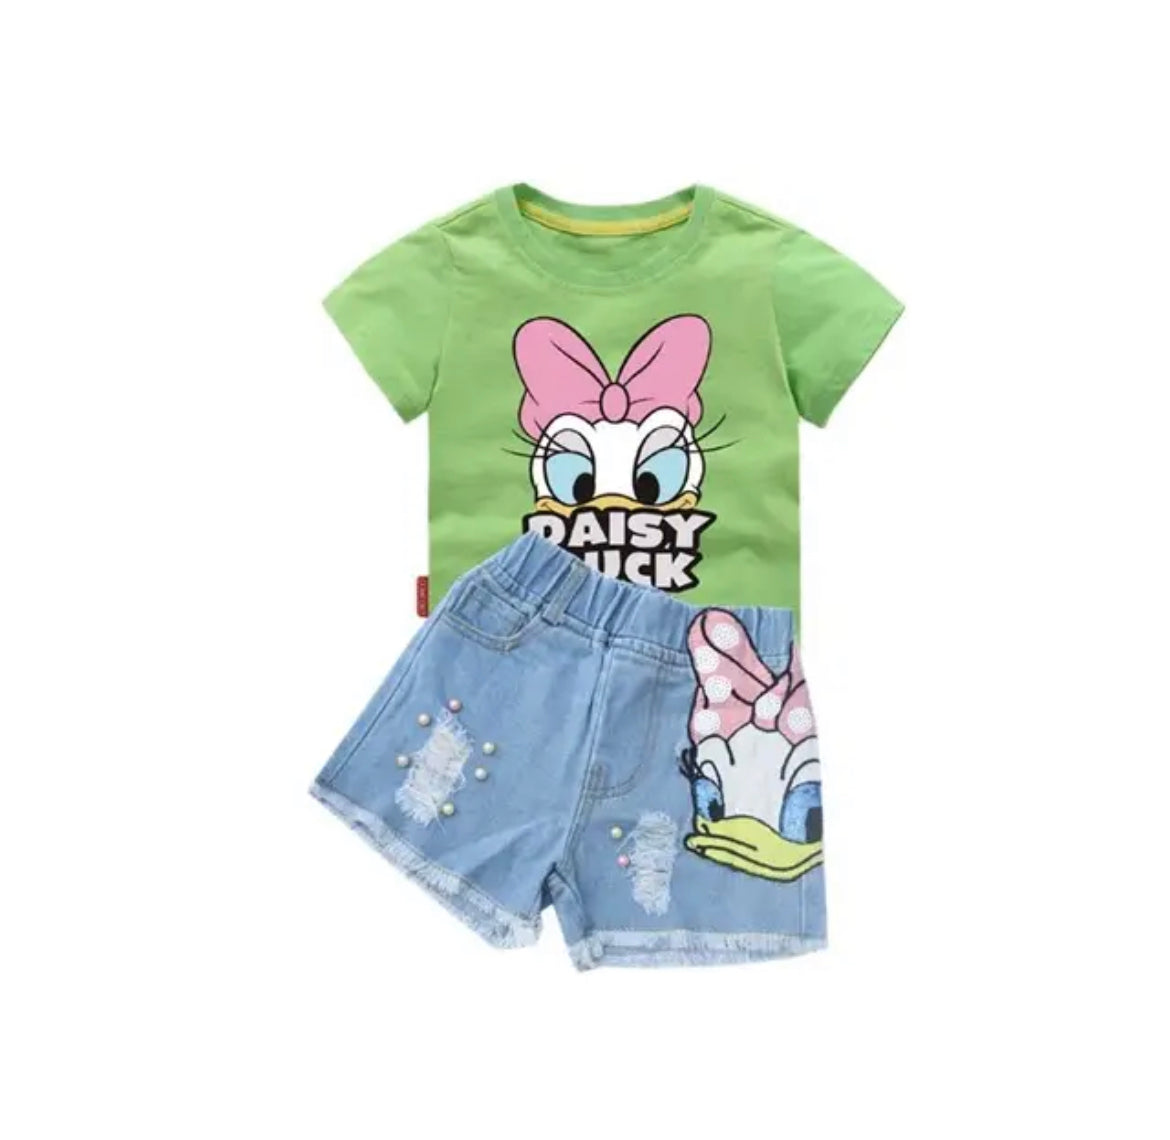 Daisy Duck Toddler Girl Outfit